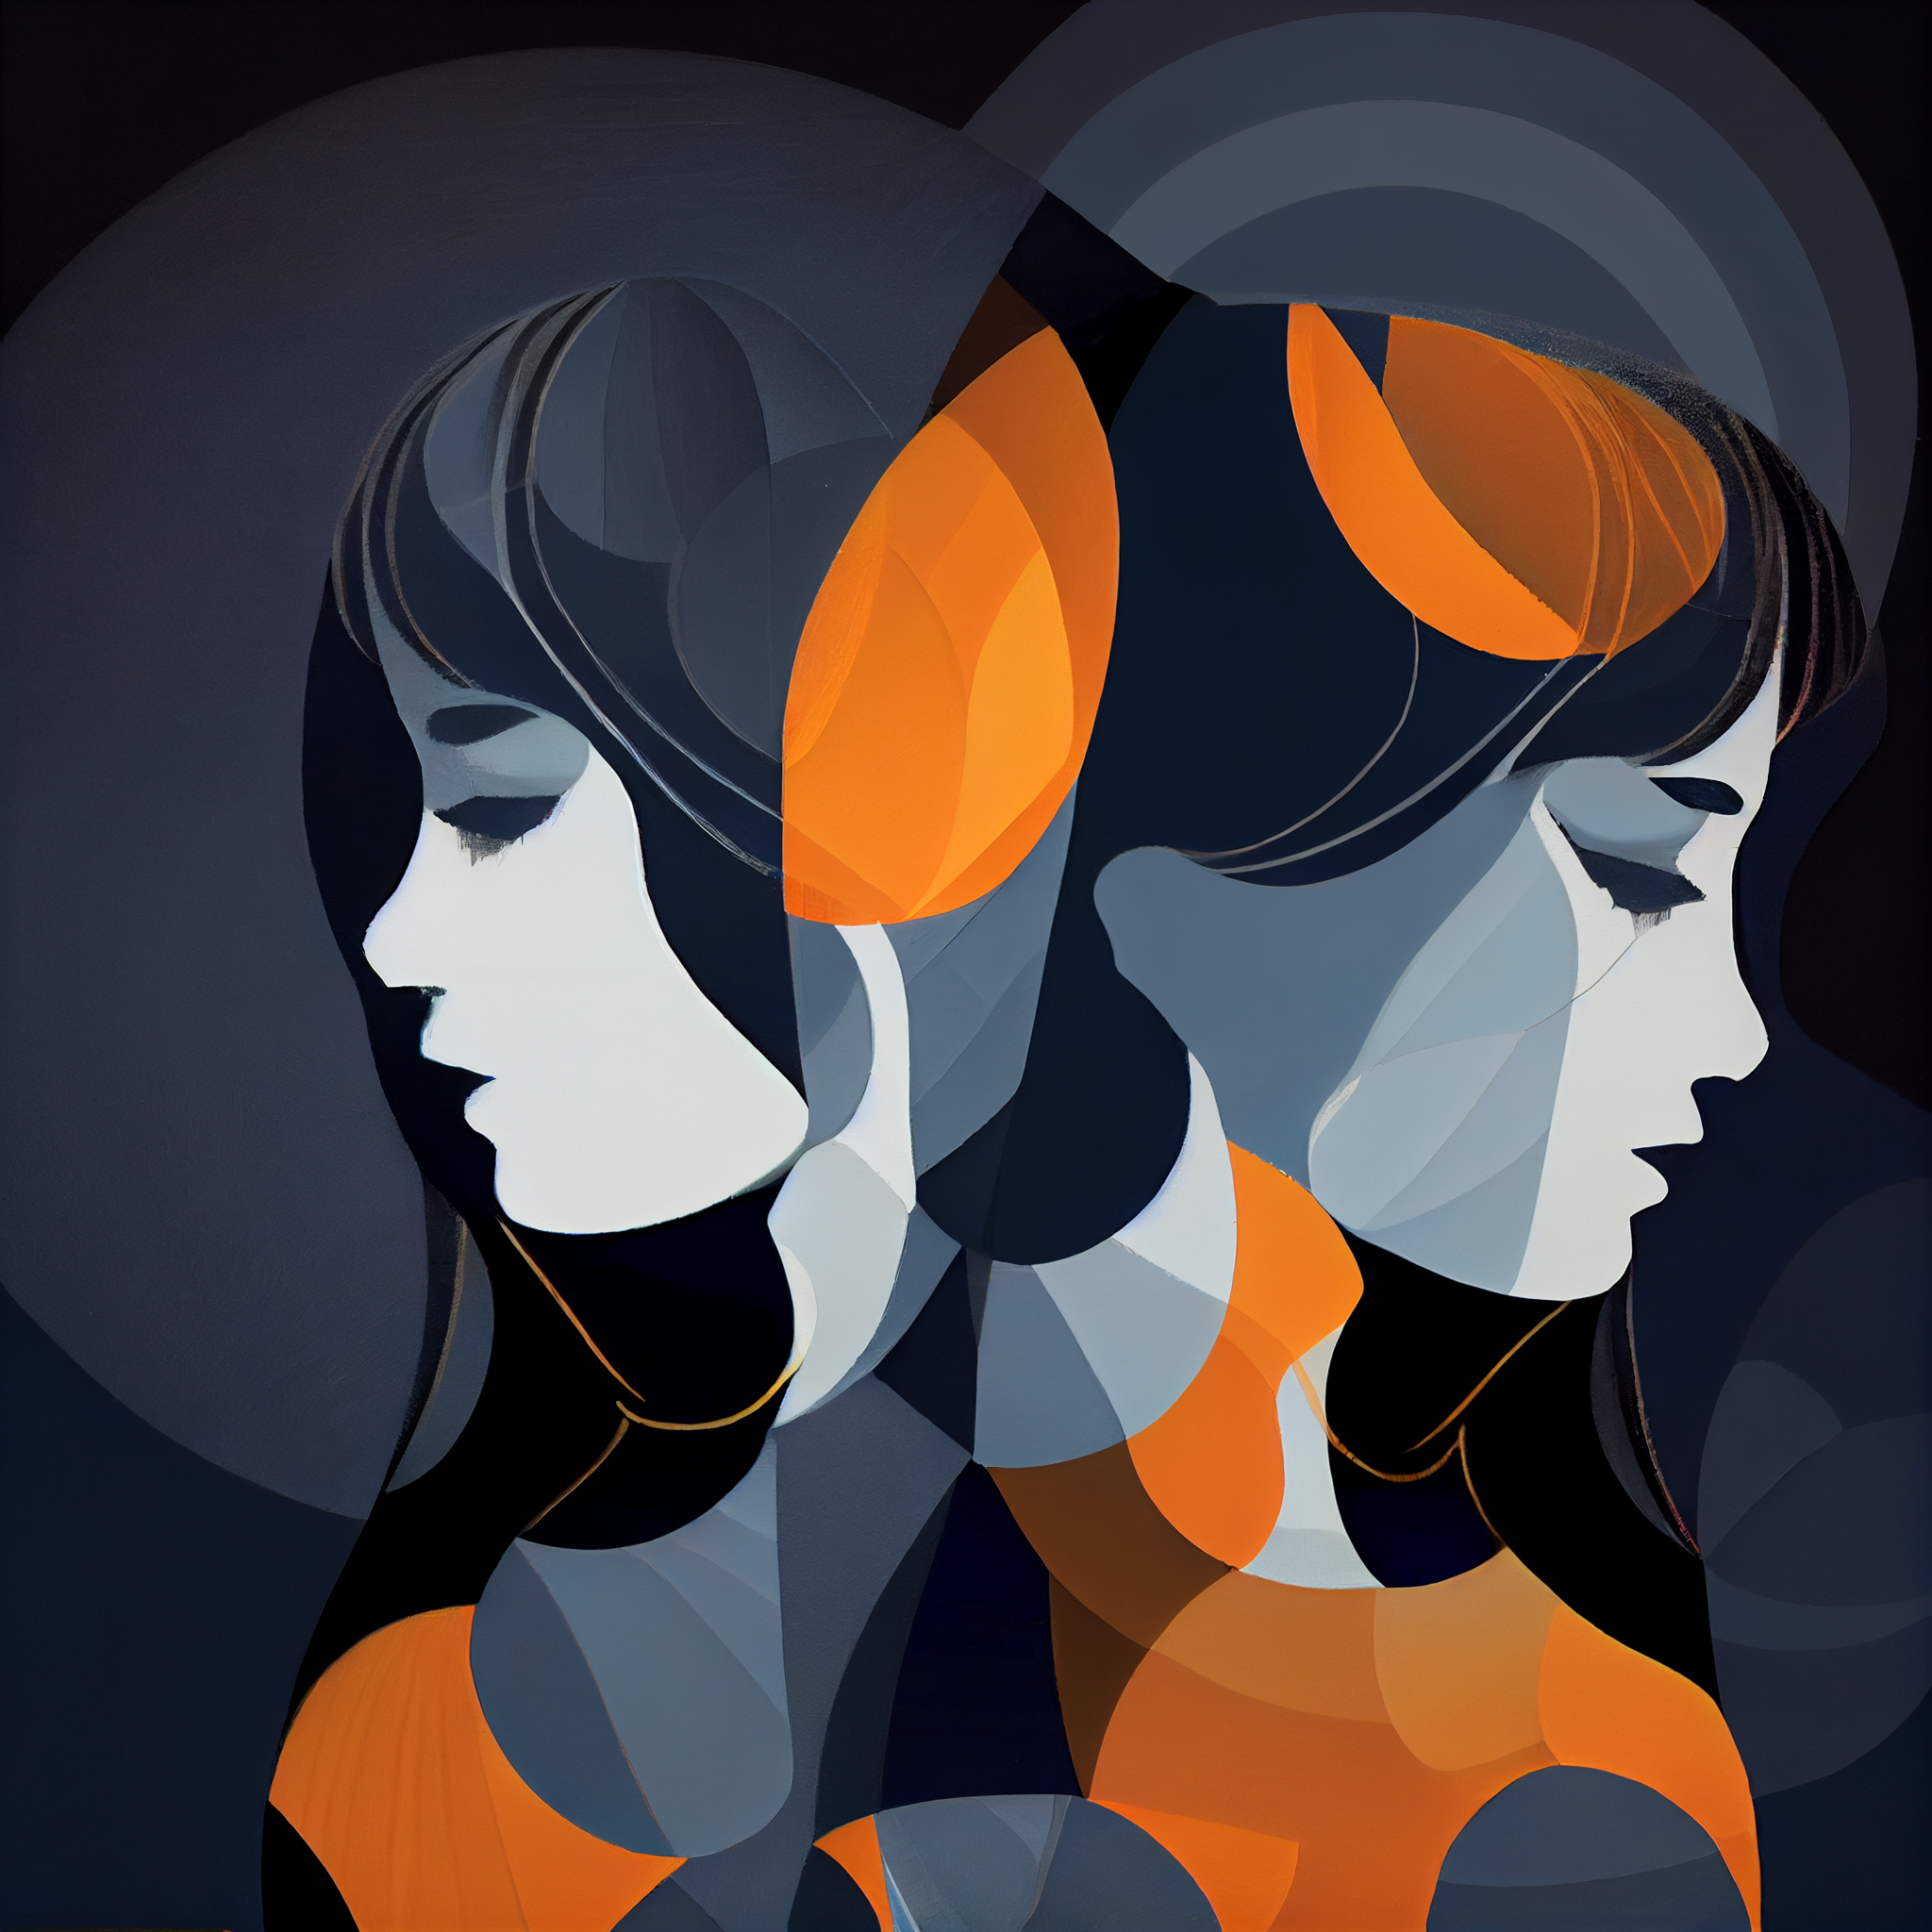 Contrasting Emotions: Black and Orange Abstract Art Print of Two Women